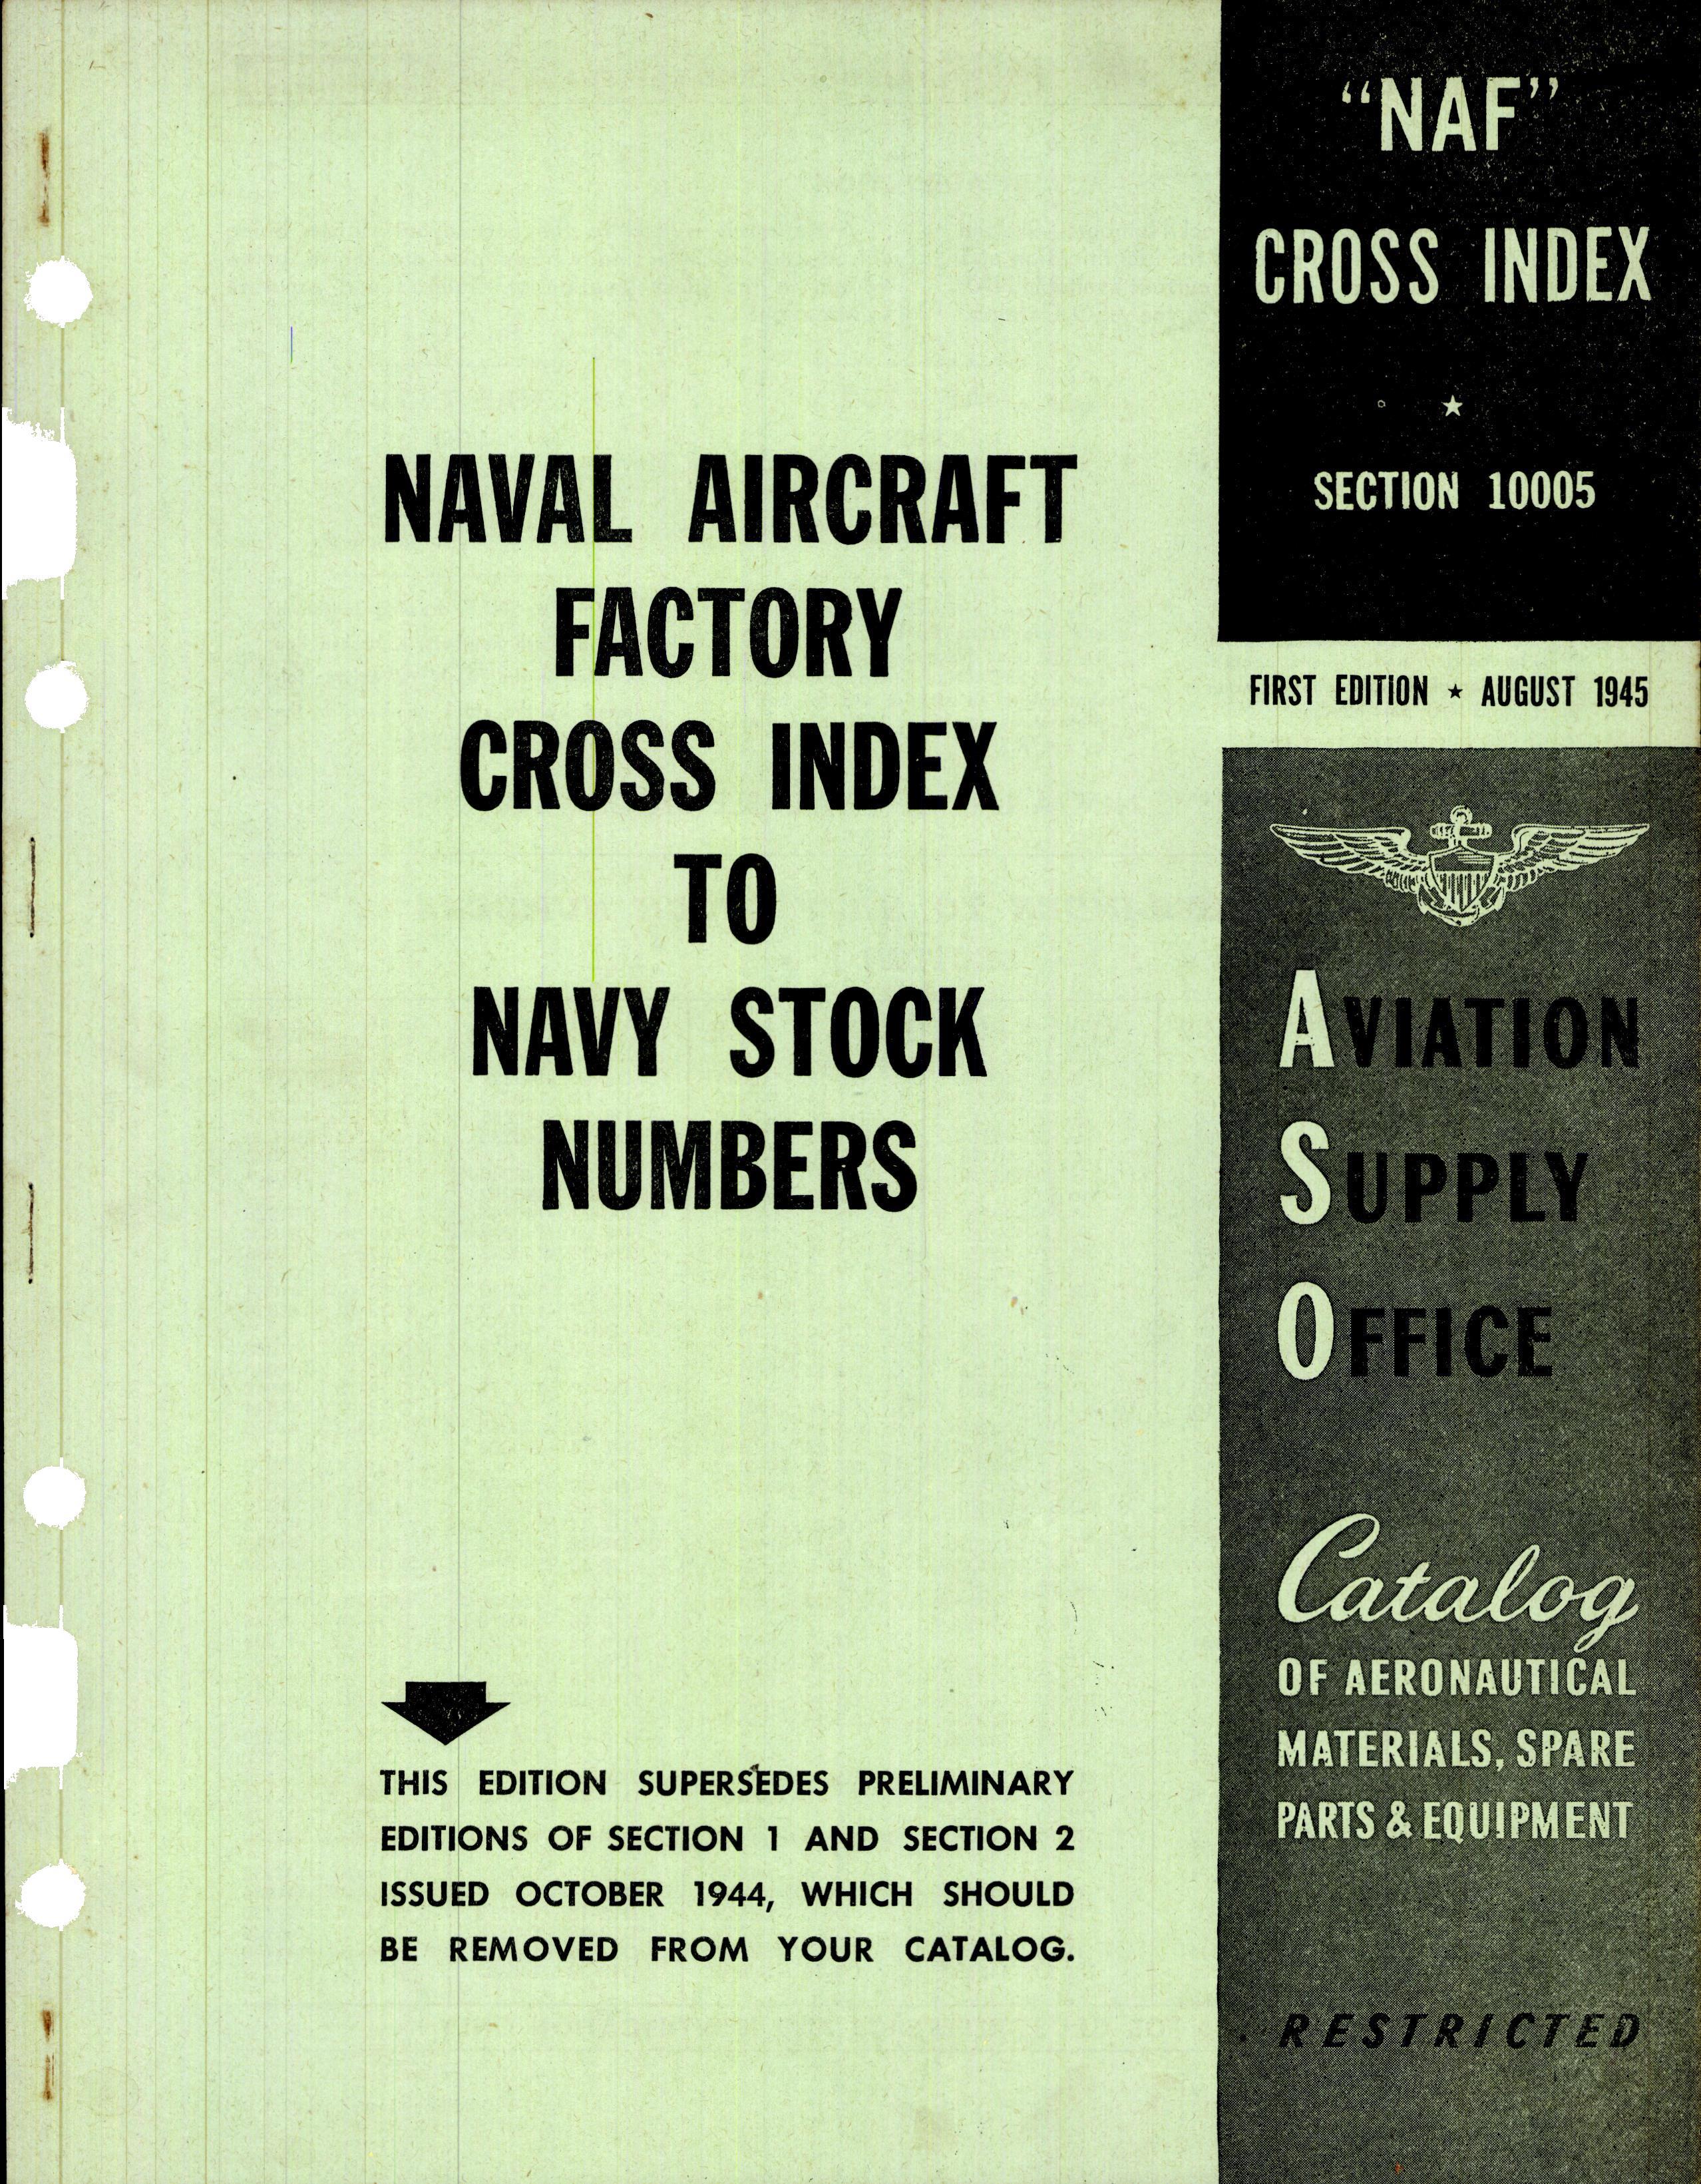 Sample page 1 from AirCorps Library document: Naval Aircraft Factory Cross Index to Navy Stock Numbers